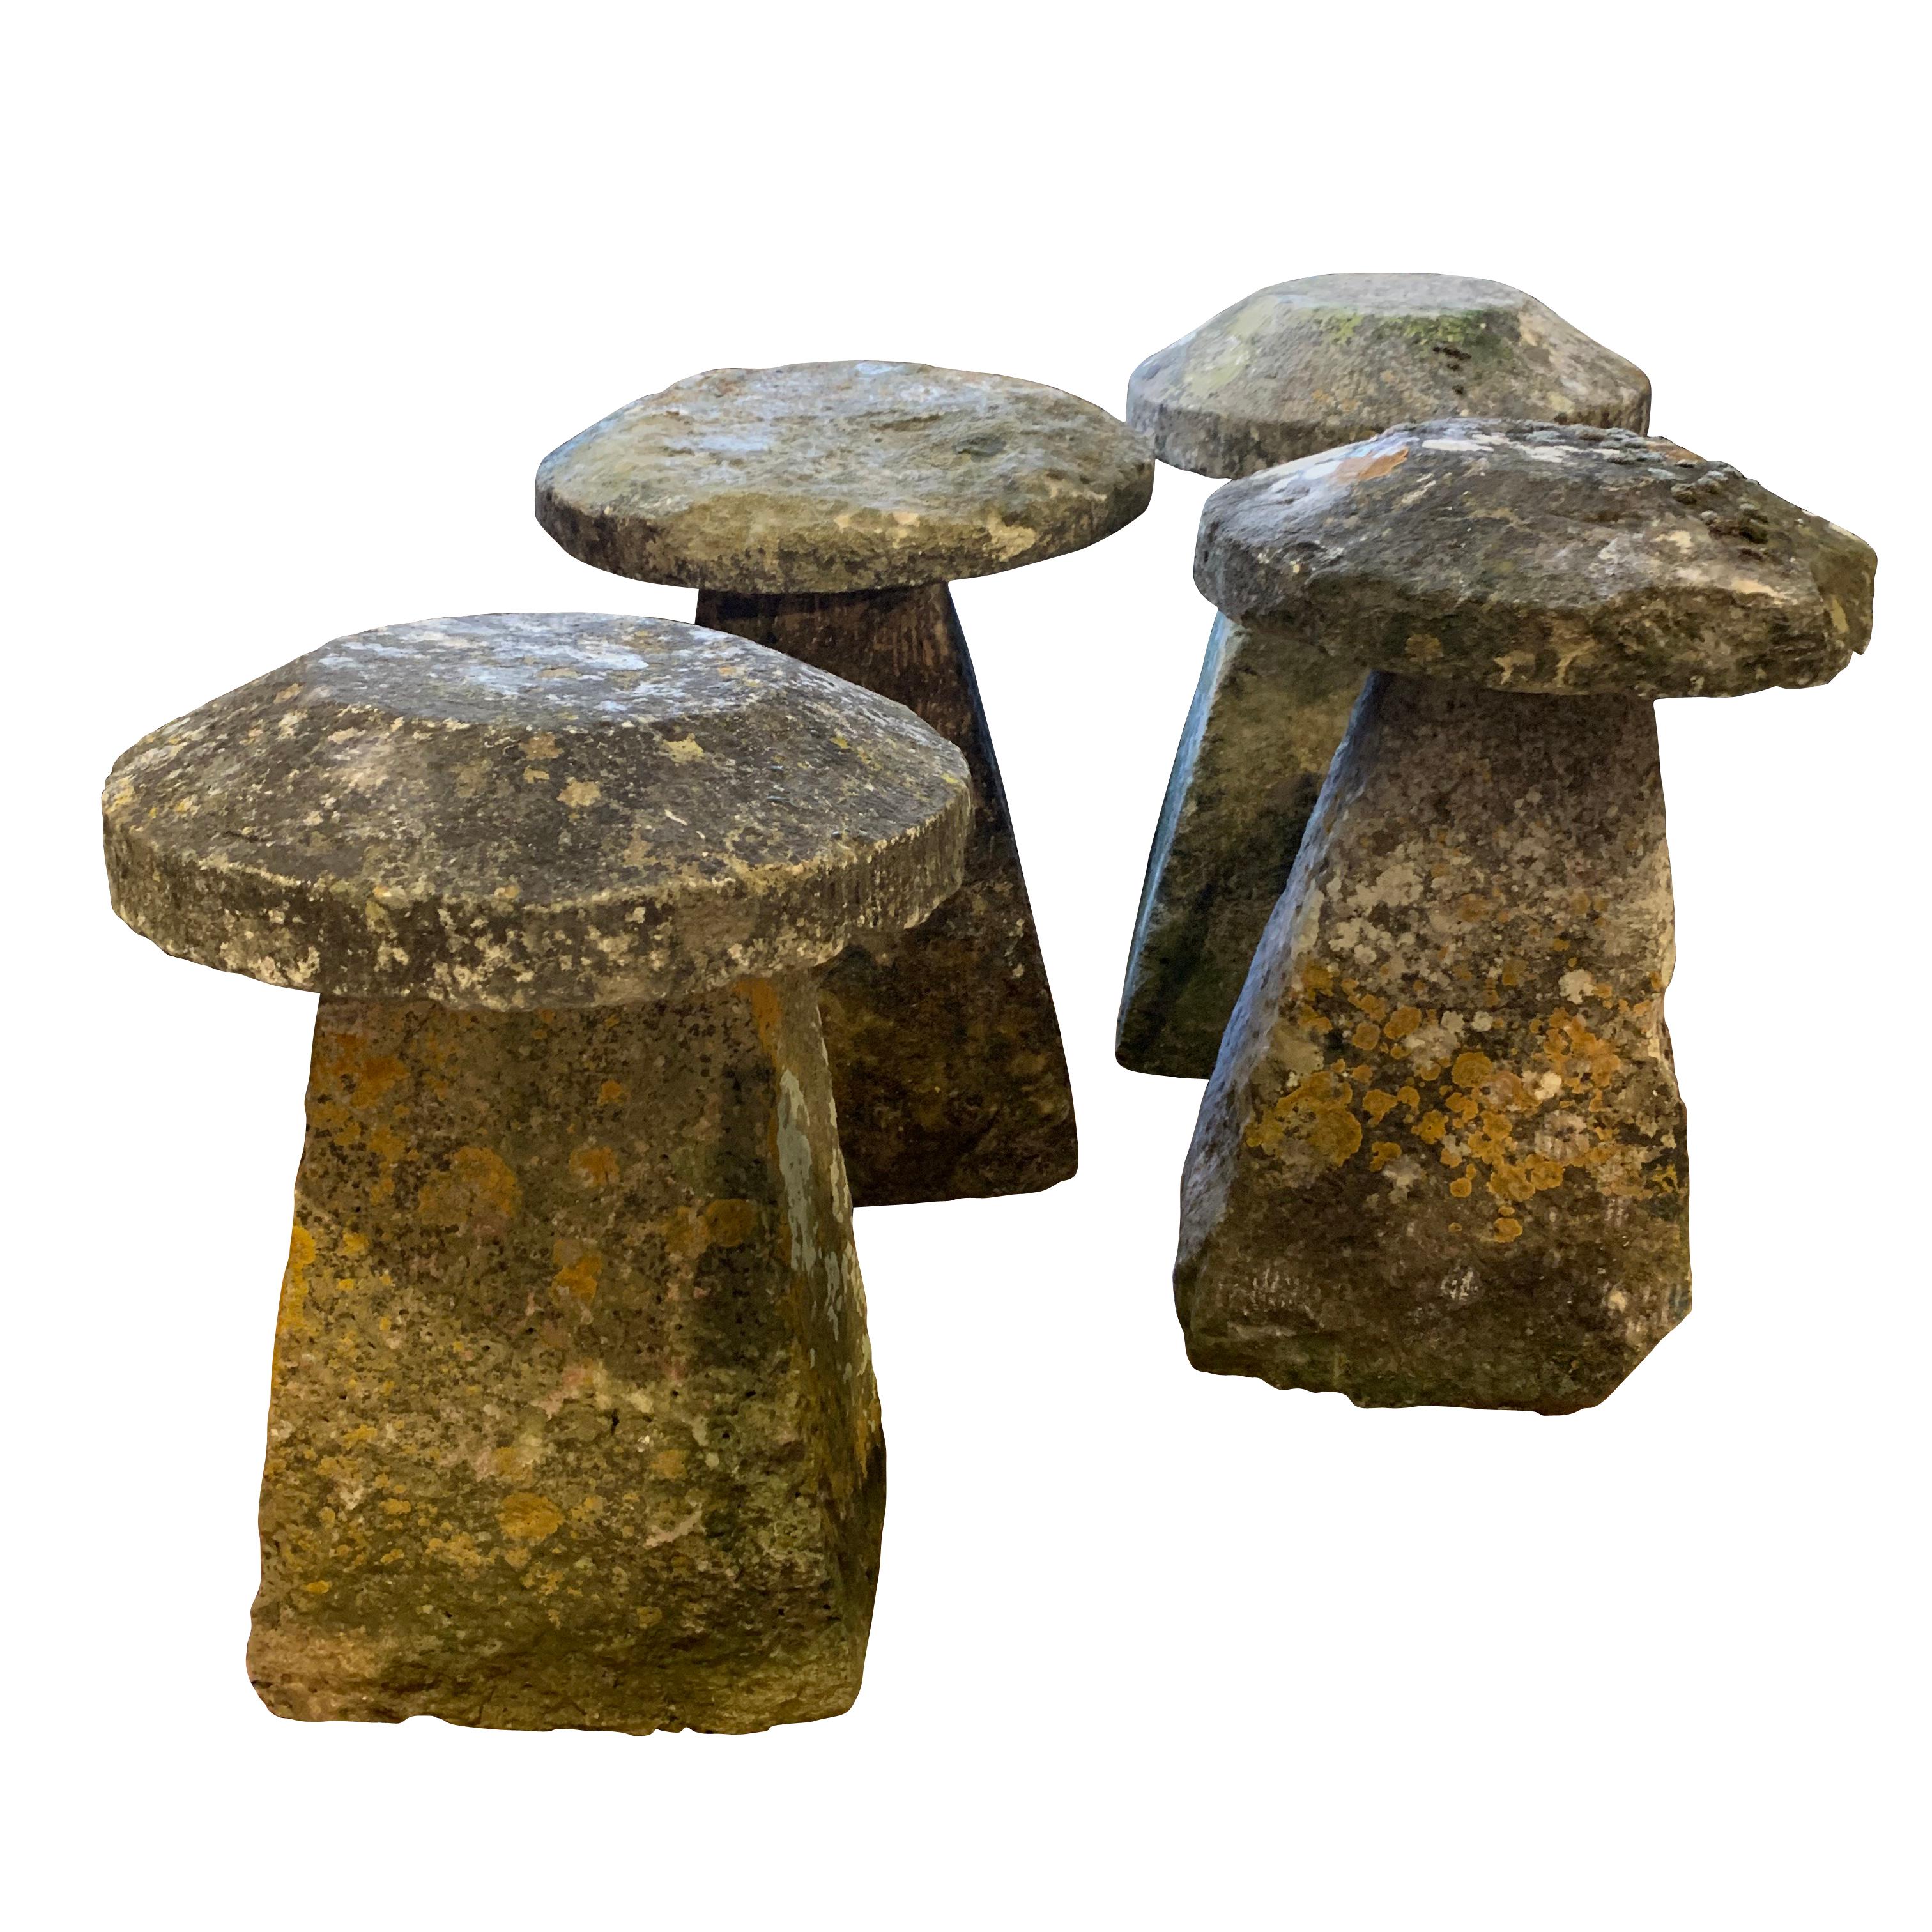 19th century English, from Cornwall, England impressively sized staddle stone
Oversized mushroom top with original moss and lichen
Beautiful natural patina
Originally used by farmers as foundations for their huts to store grain for the